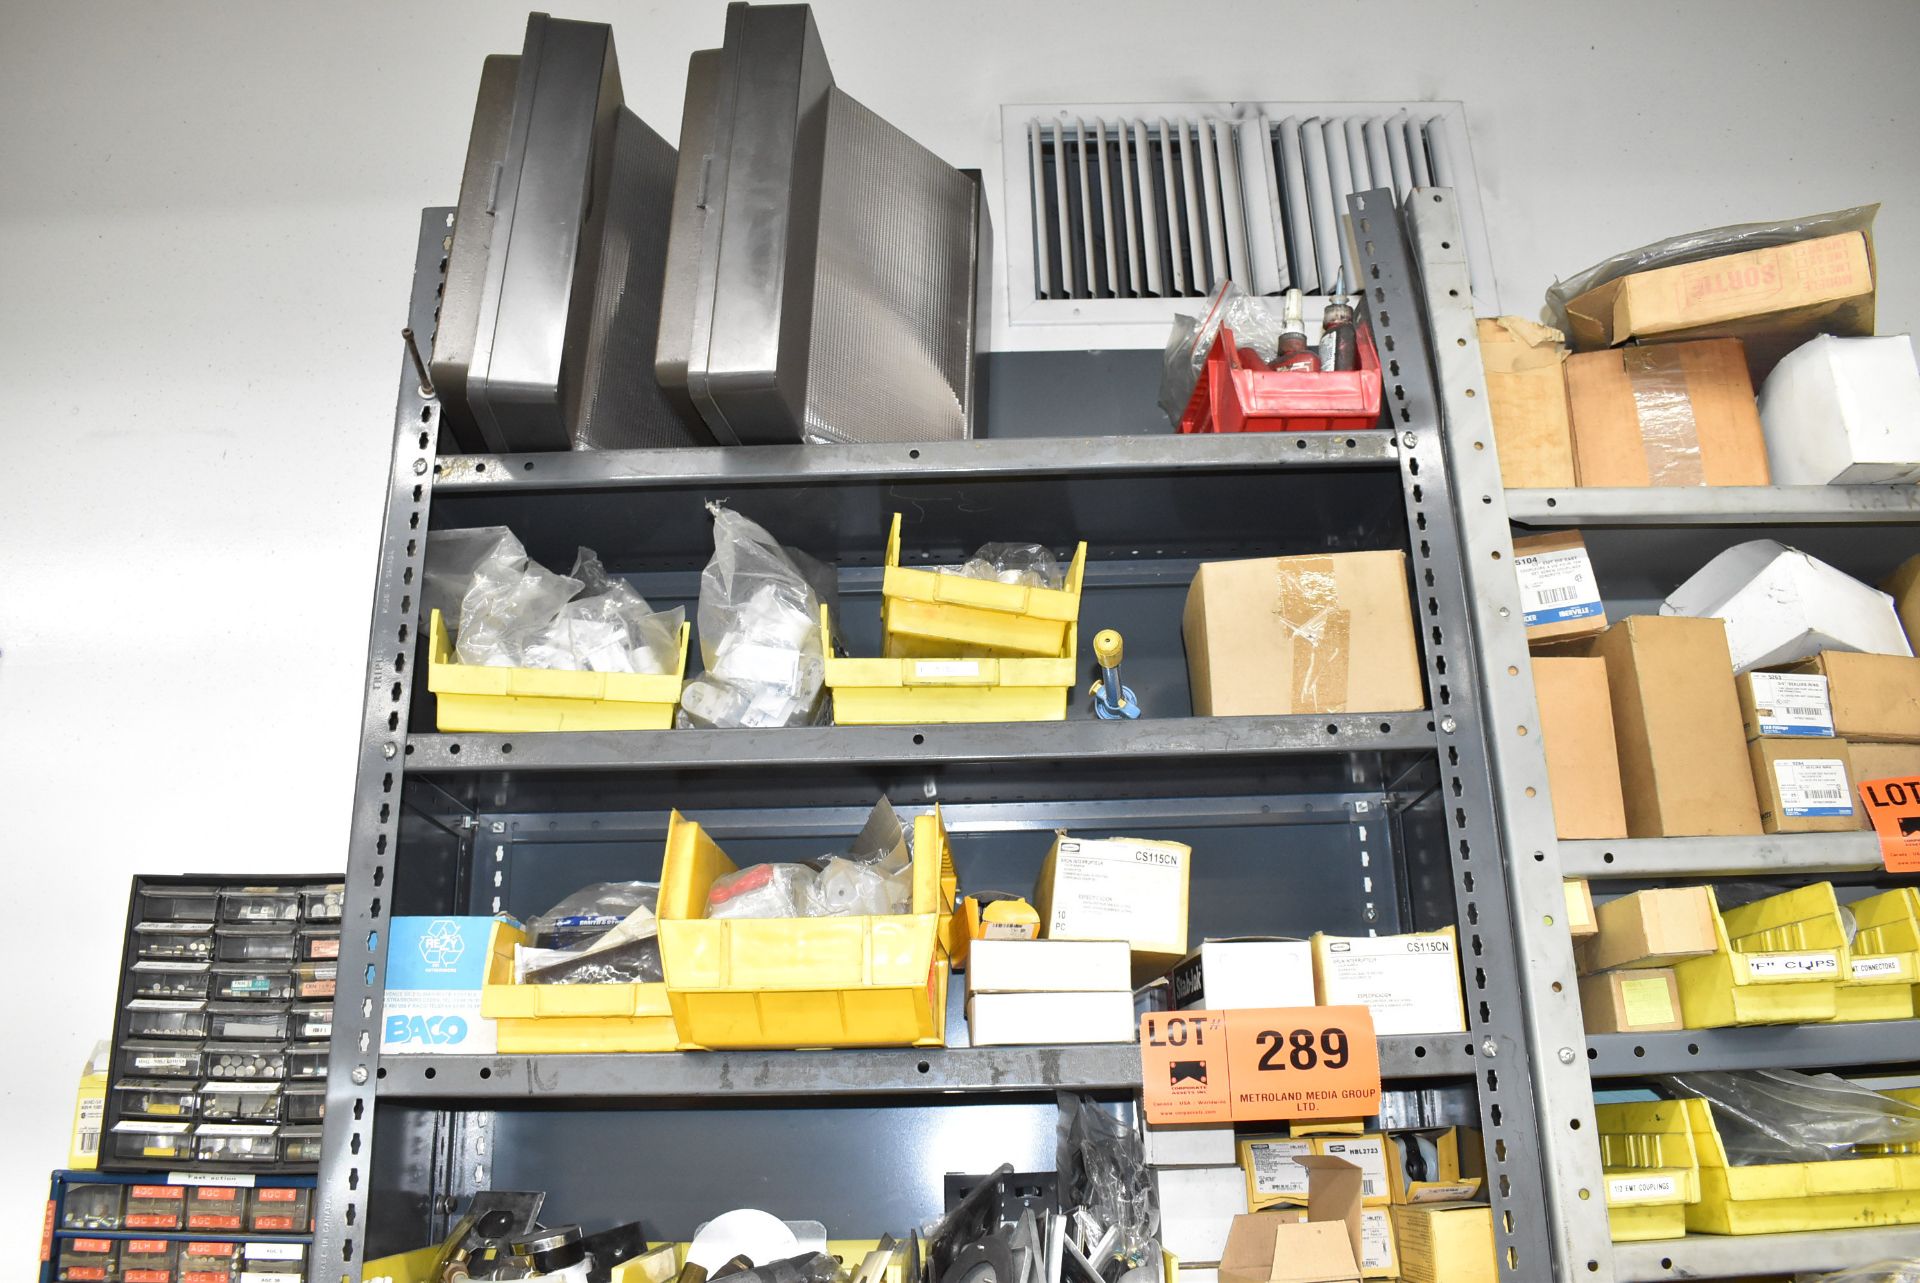 LOT/ STEEL SHELF WITH CONTENTS - INCLUDING ELECTRIC MOTOR, PLUGS, SIGNAL LIGHTS, RELAYS, - Image 2 of 6